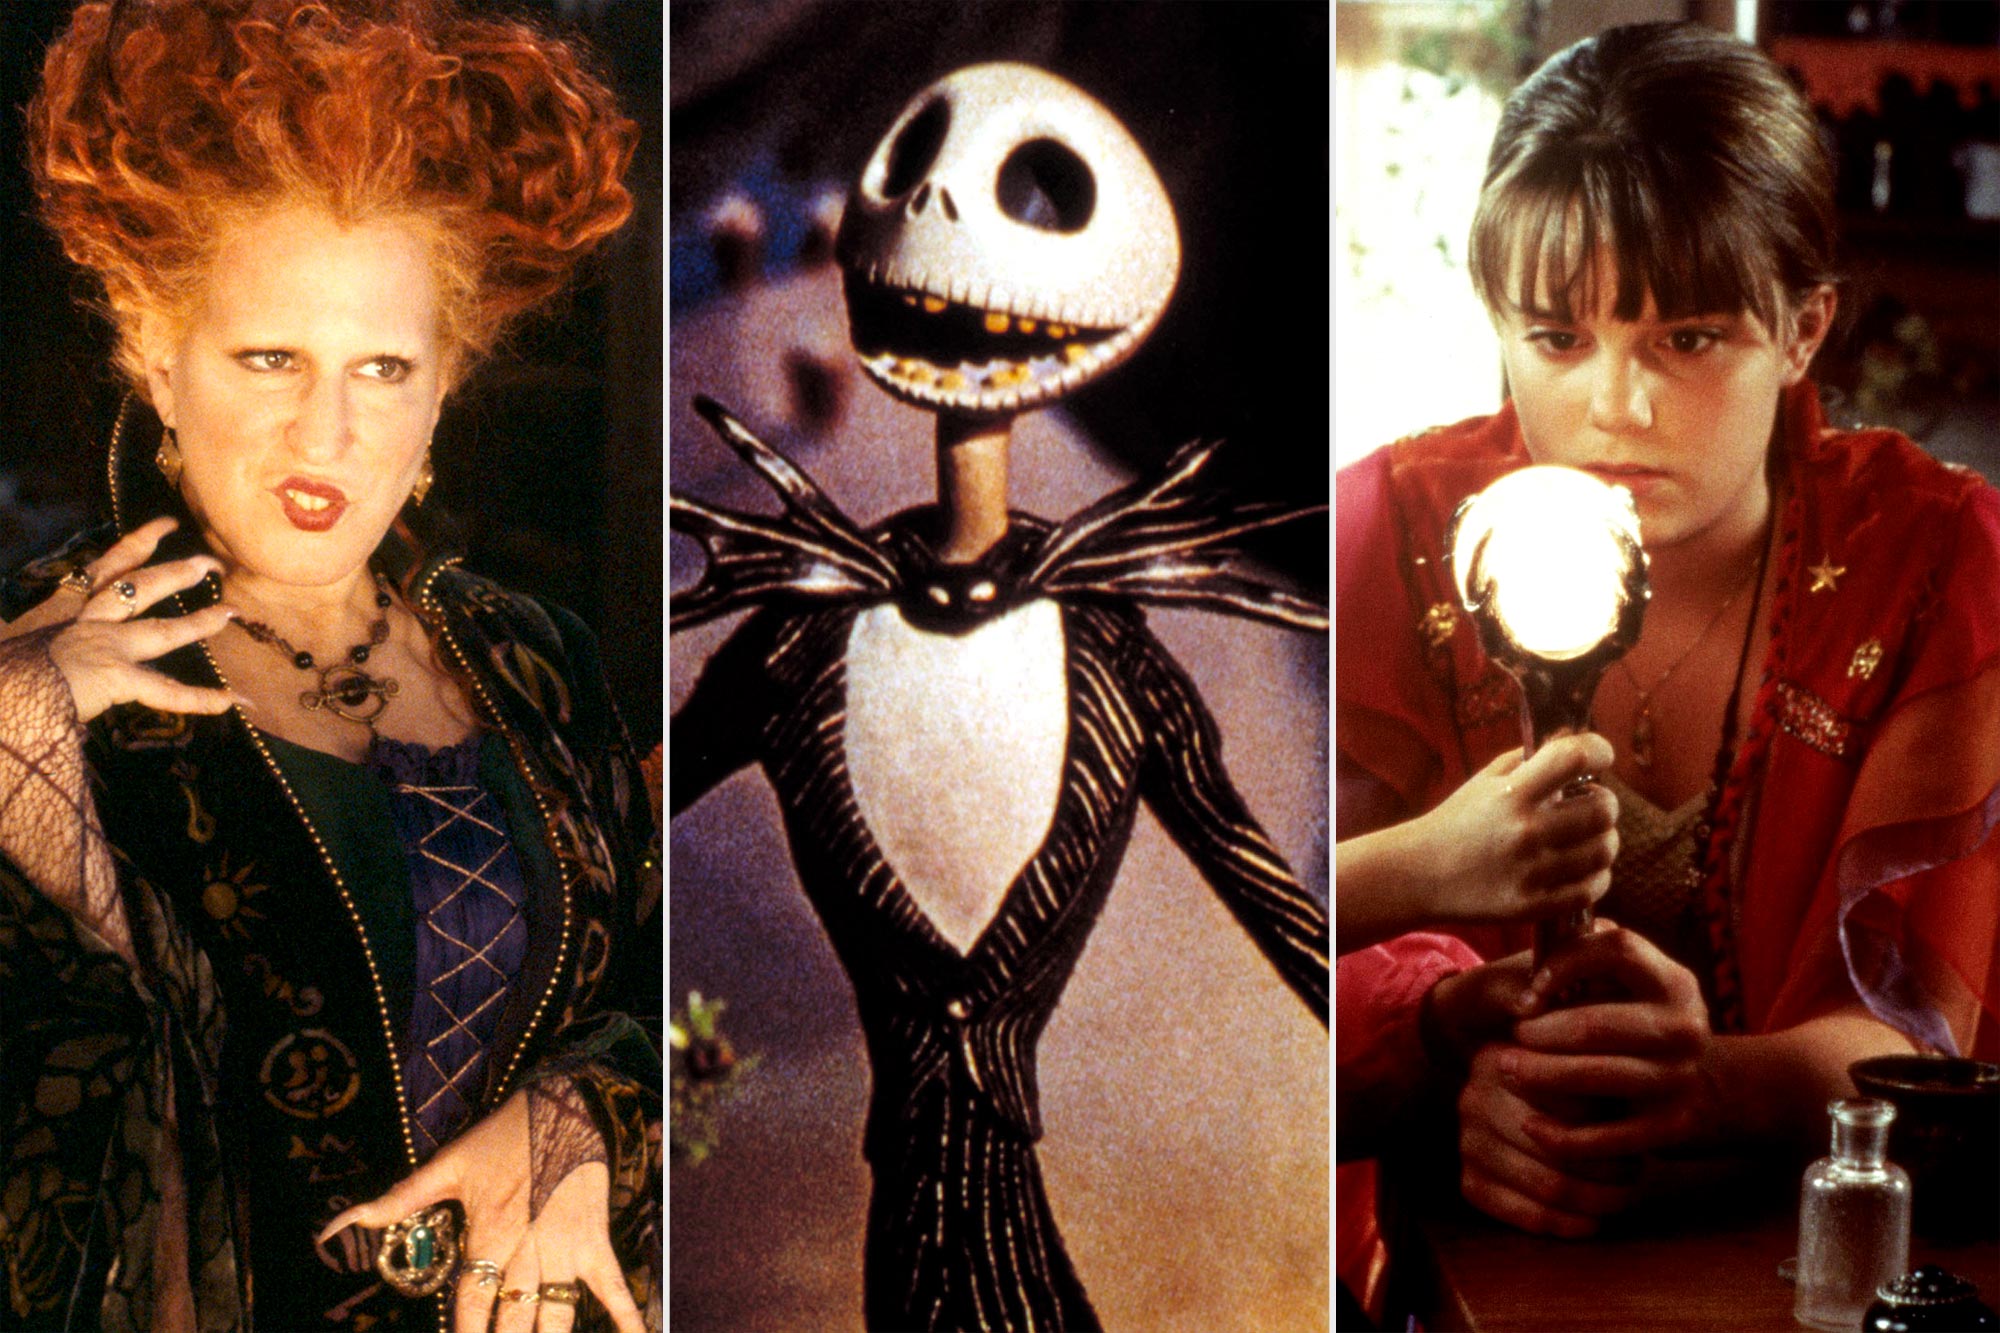 Family-friendly Halloween films for boos big and small